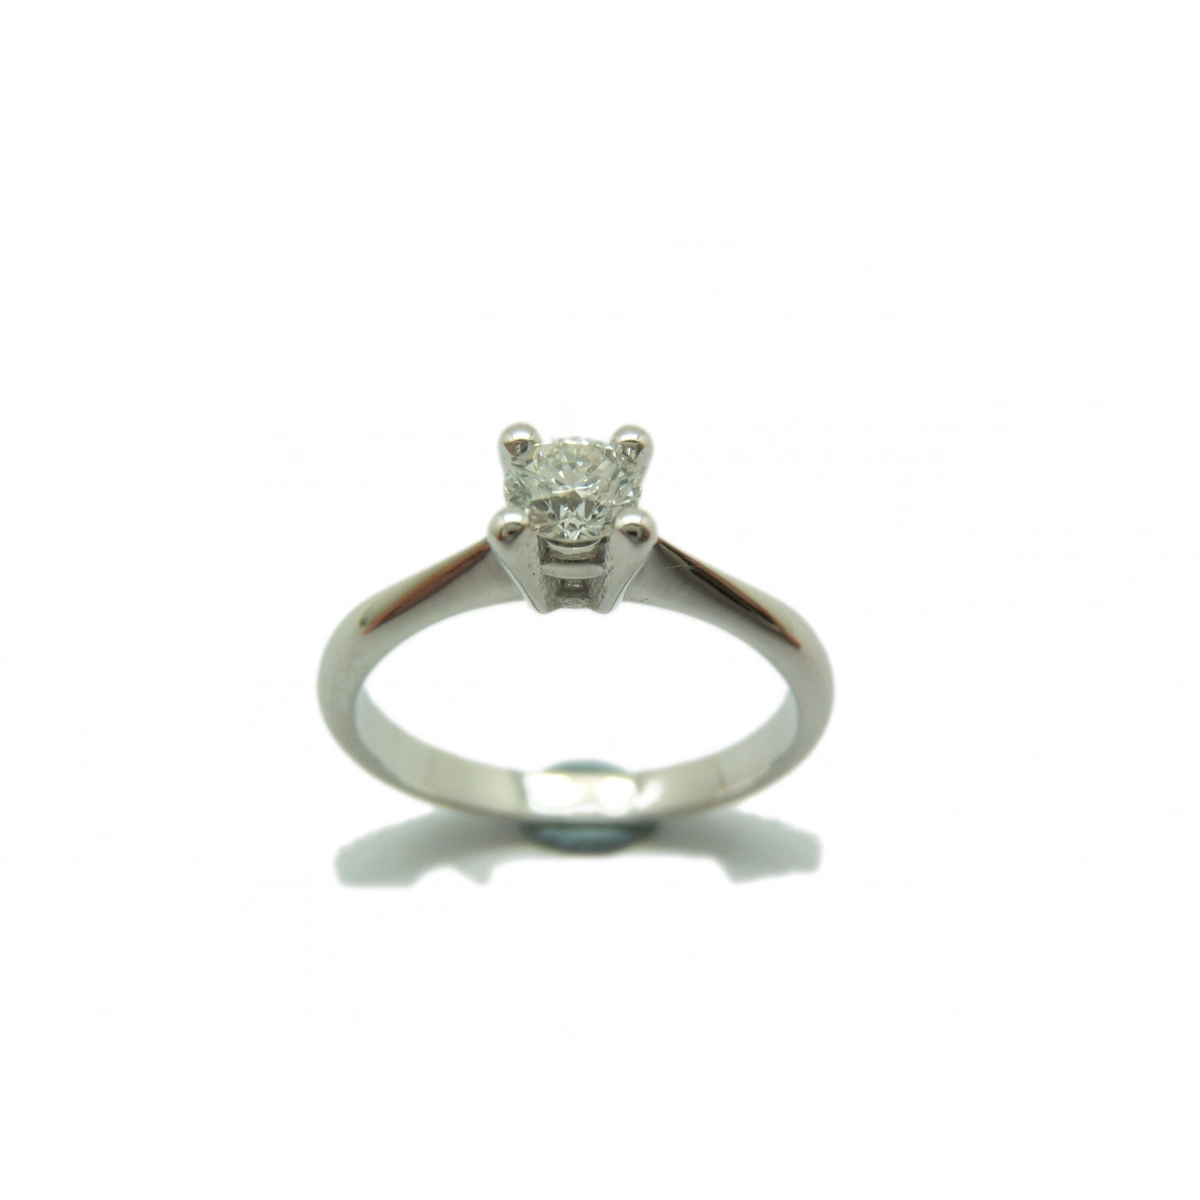 RING SOLITAIRE WHITE GOLD WITH DIAMOND A-404 B-79